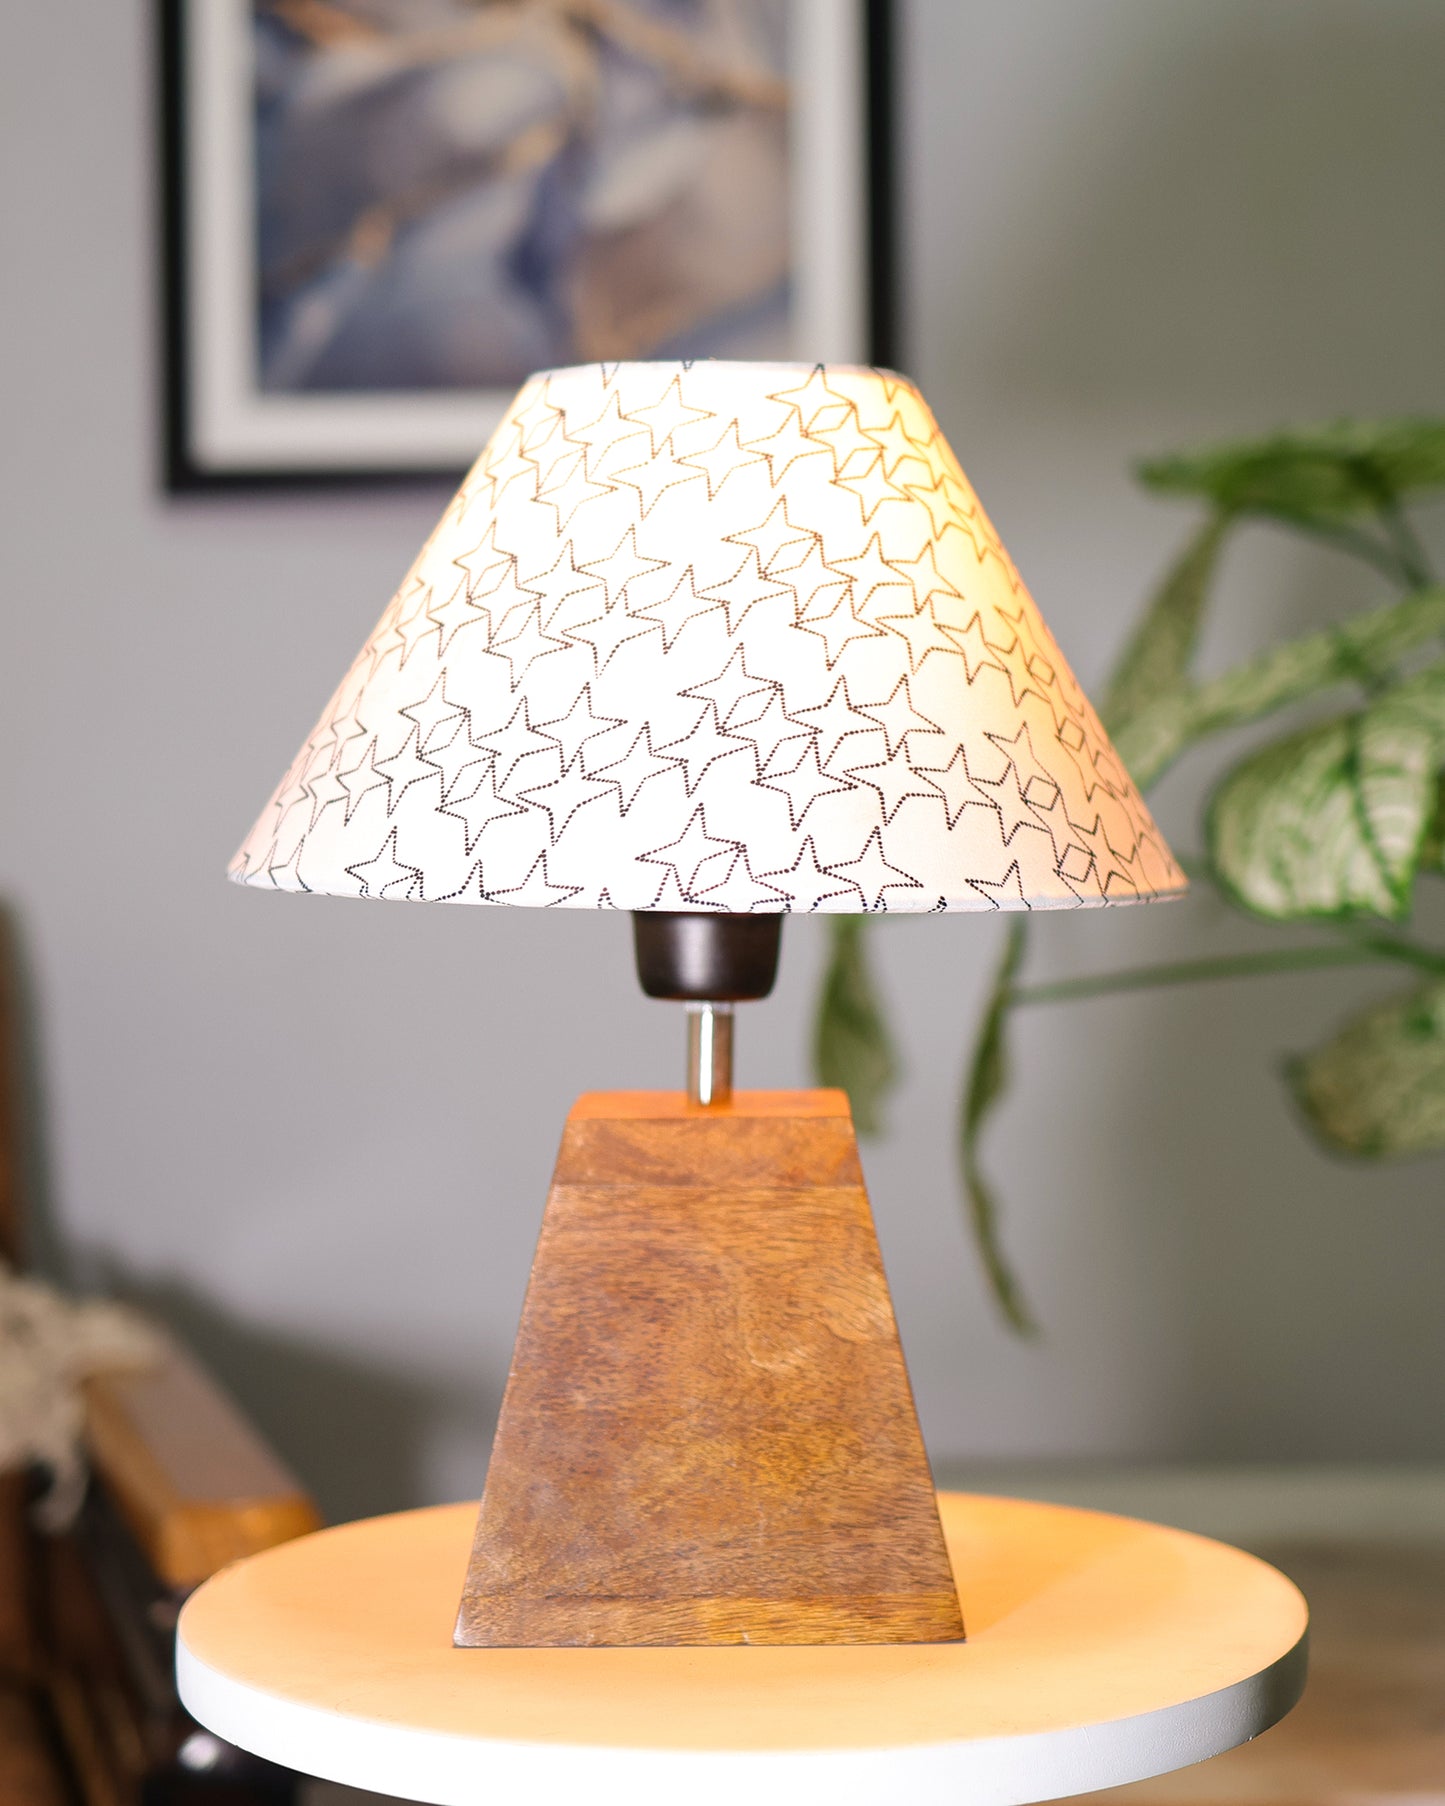 Pyramid Modern Table Lamp, Wooden Base Modern Fabric Lampshade for Home Office Cafe Restaurant, Cone